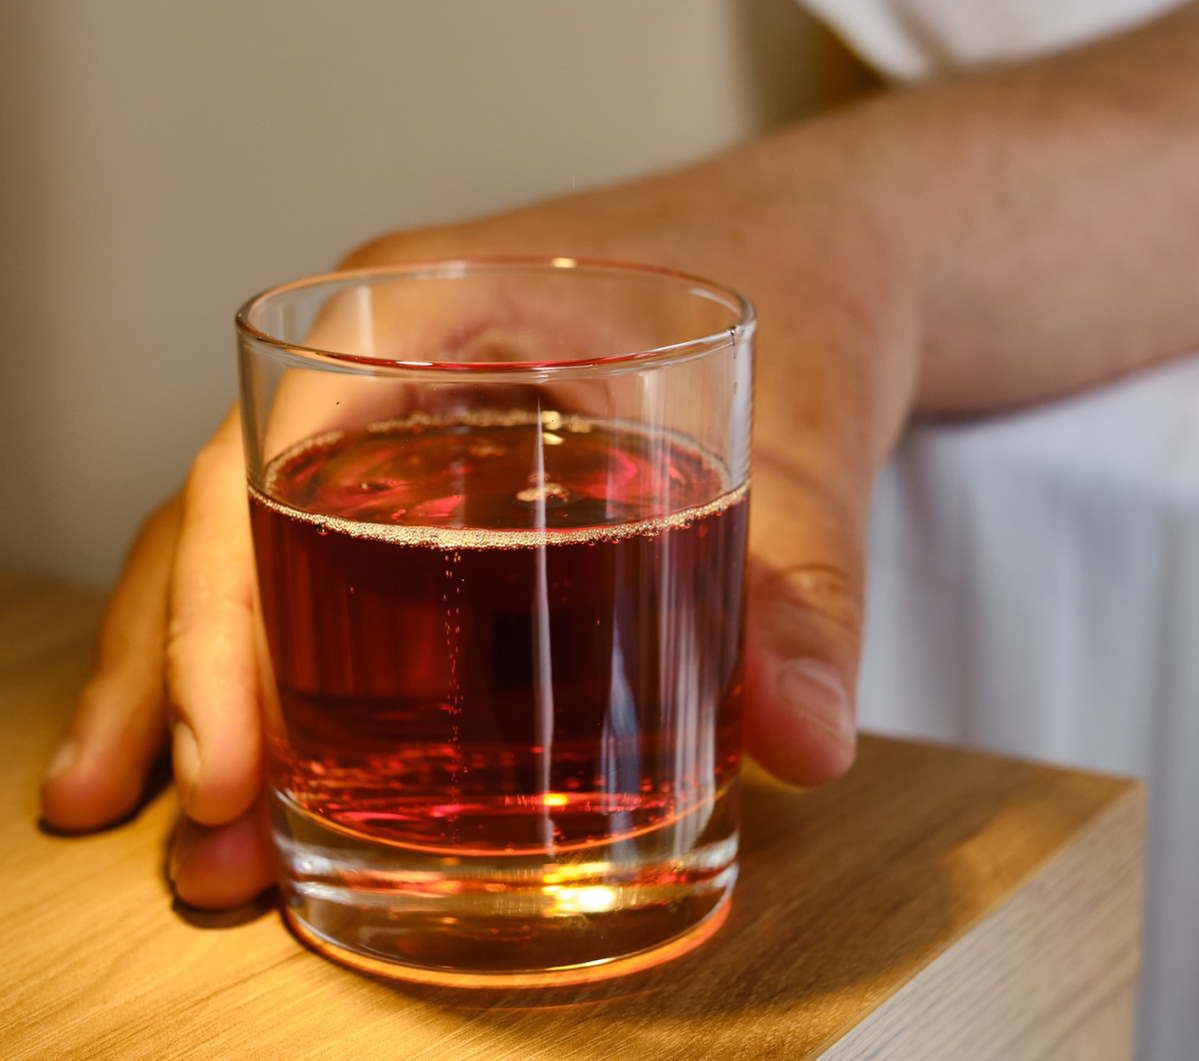 An evening drink: How your nightcap could be disrupting your sleep